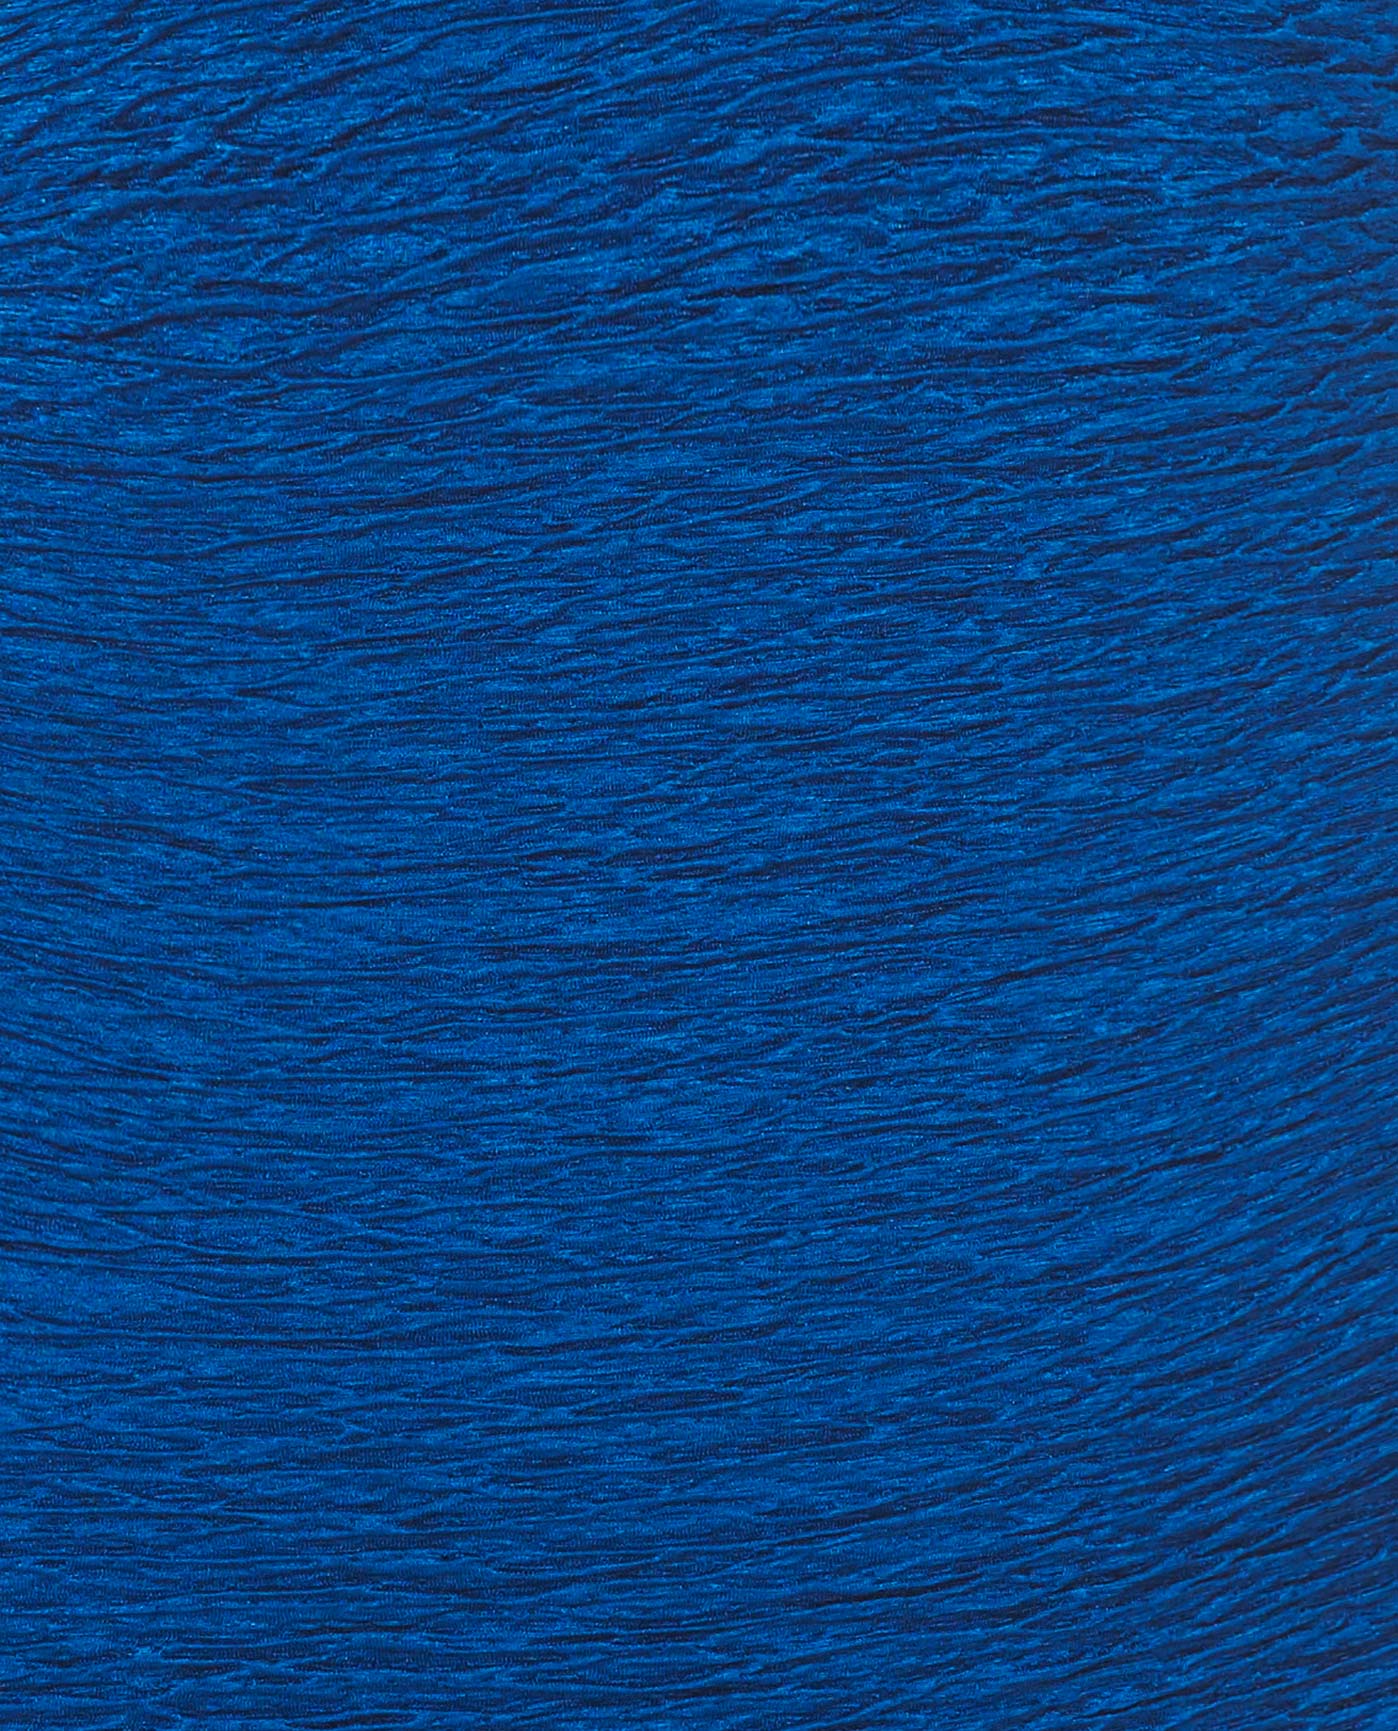 FABRIC SWATCH VIEW OF CHLORINE RESISTANT KRINKLE TEXTURED SOLID ACTIVE BACK ONE PIECE | KRINKLE MARINE BLUE